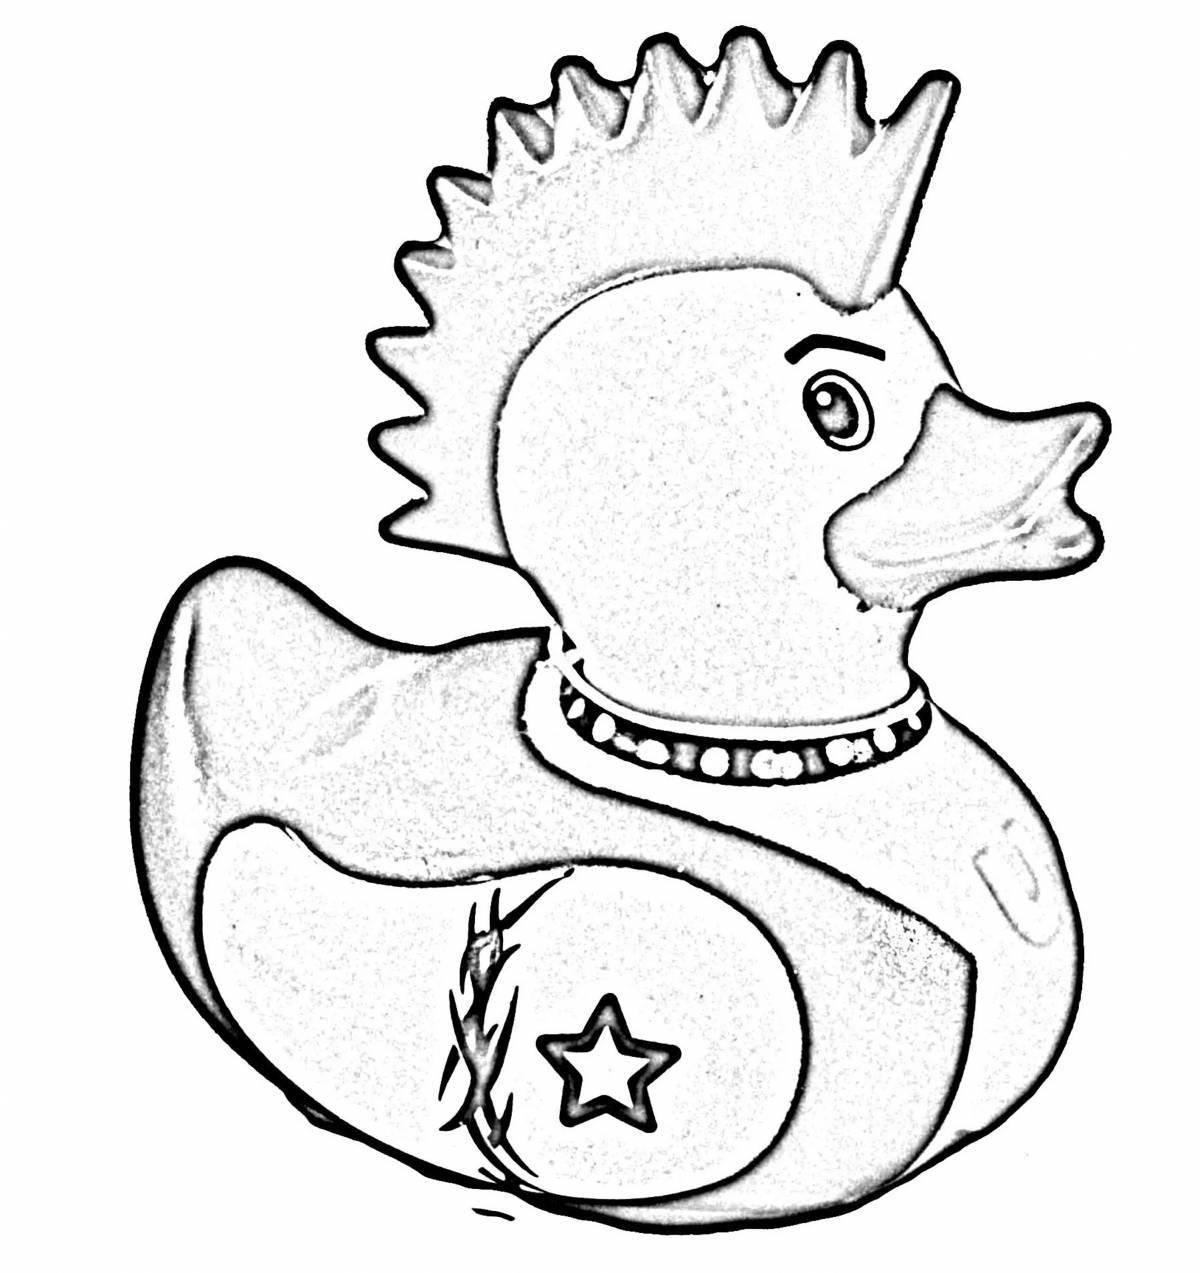 Coloring page relaxed rubber duck